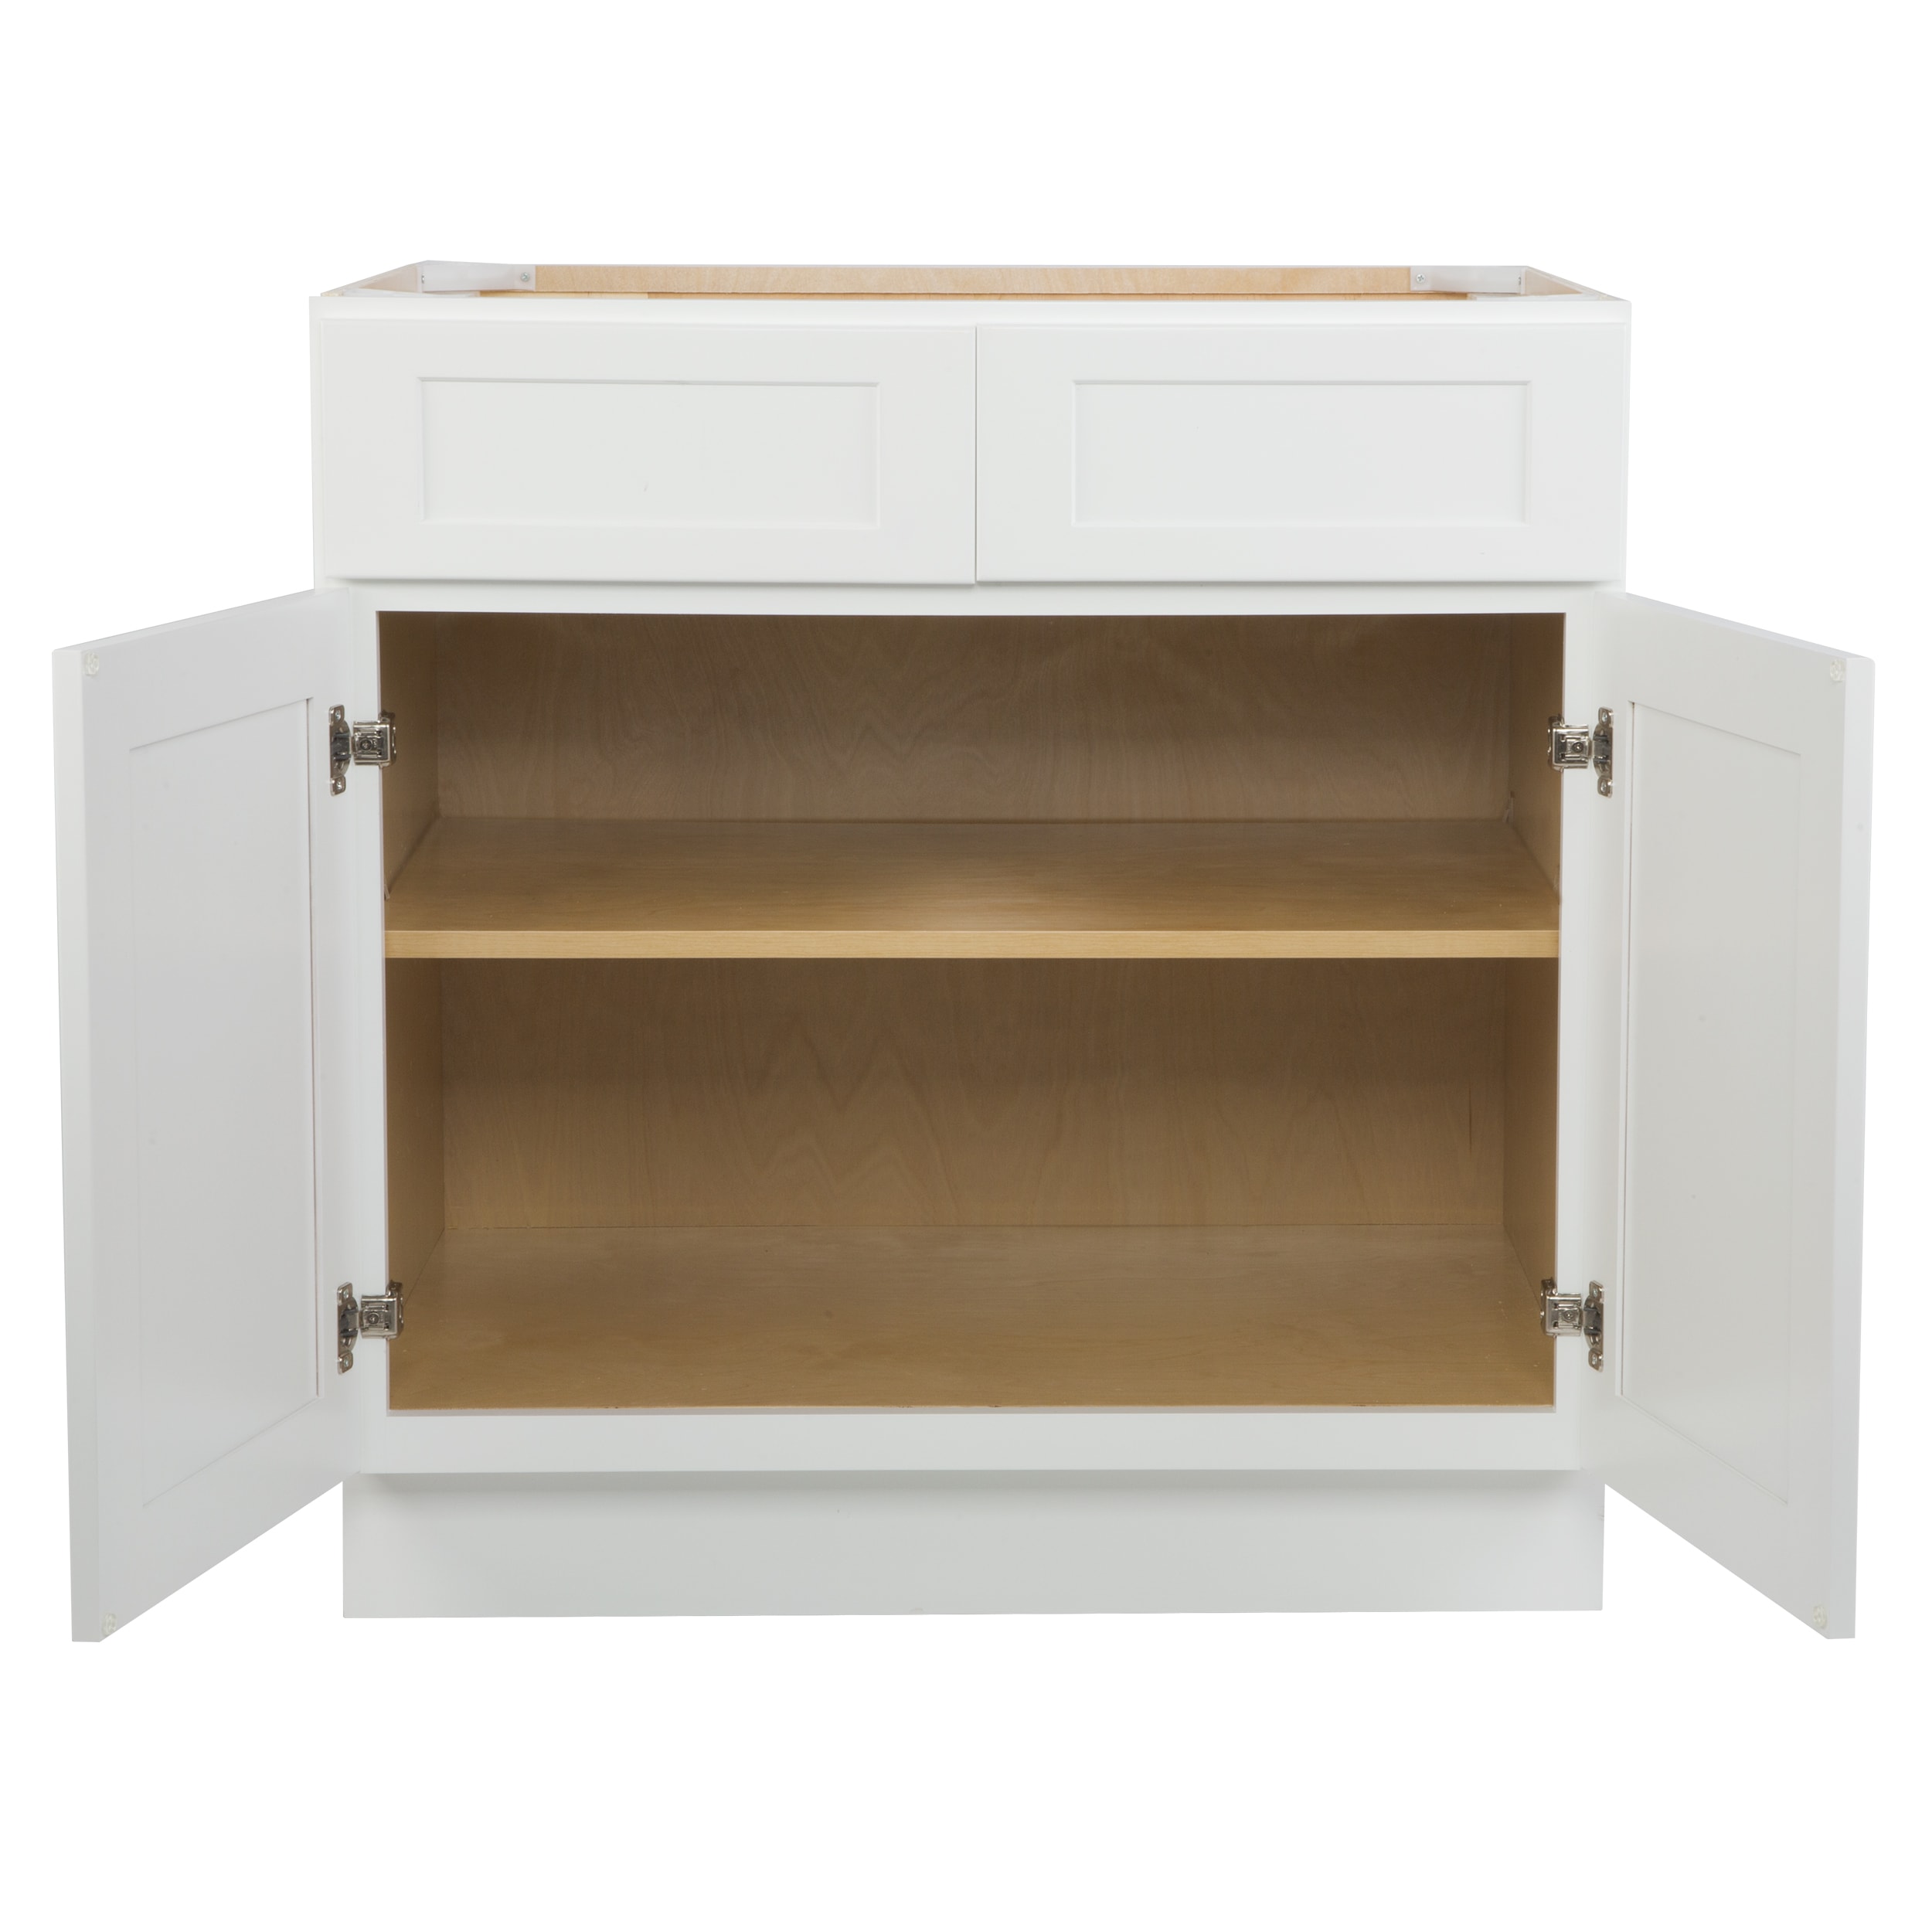 Basicwise 51-in H x 11.75-in W x 51-in D White/Wood Stackable Wood